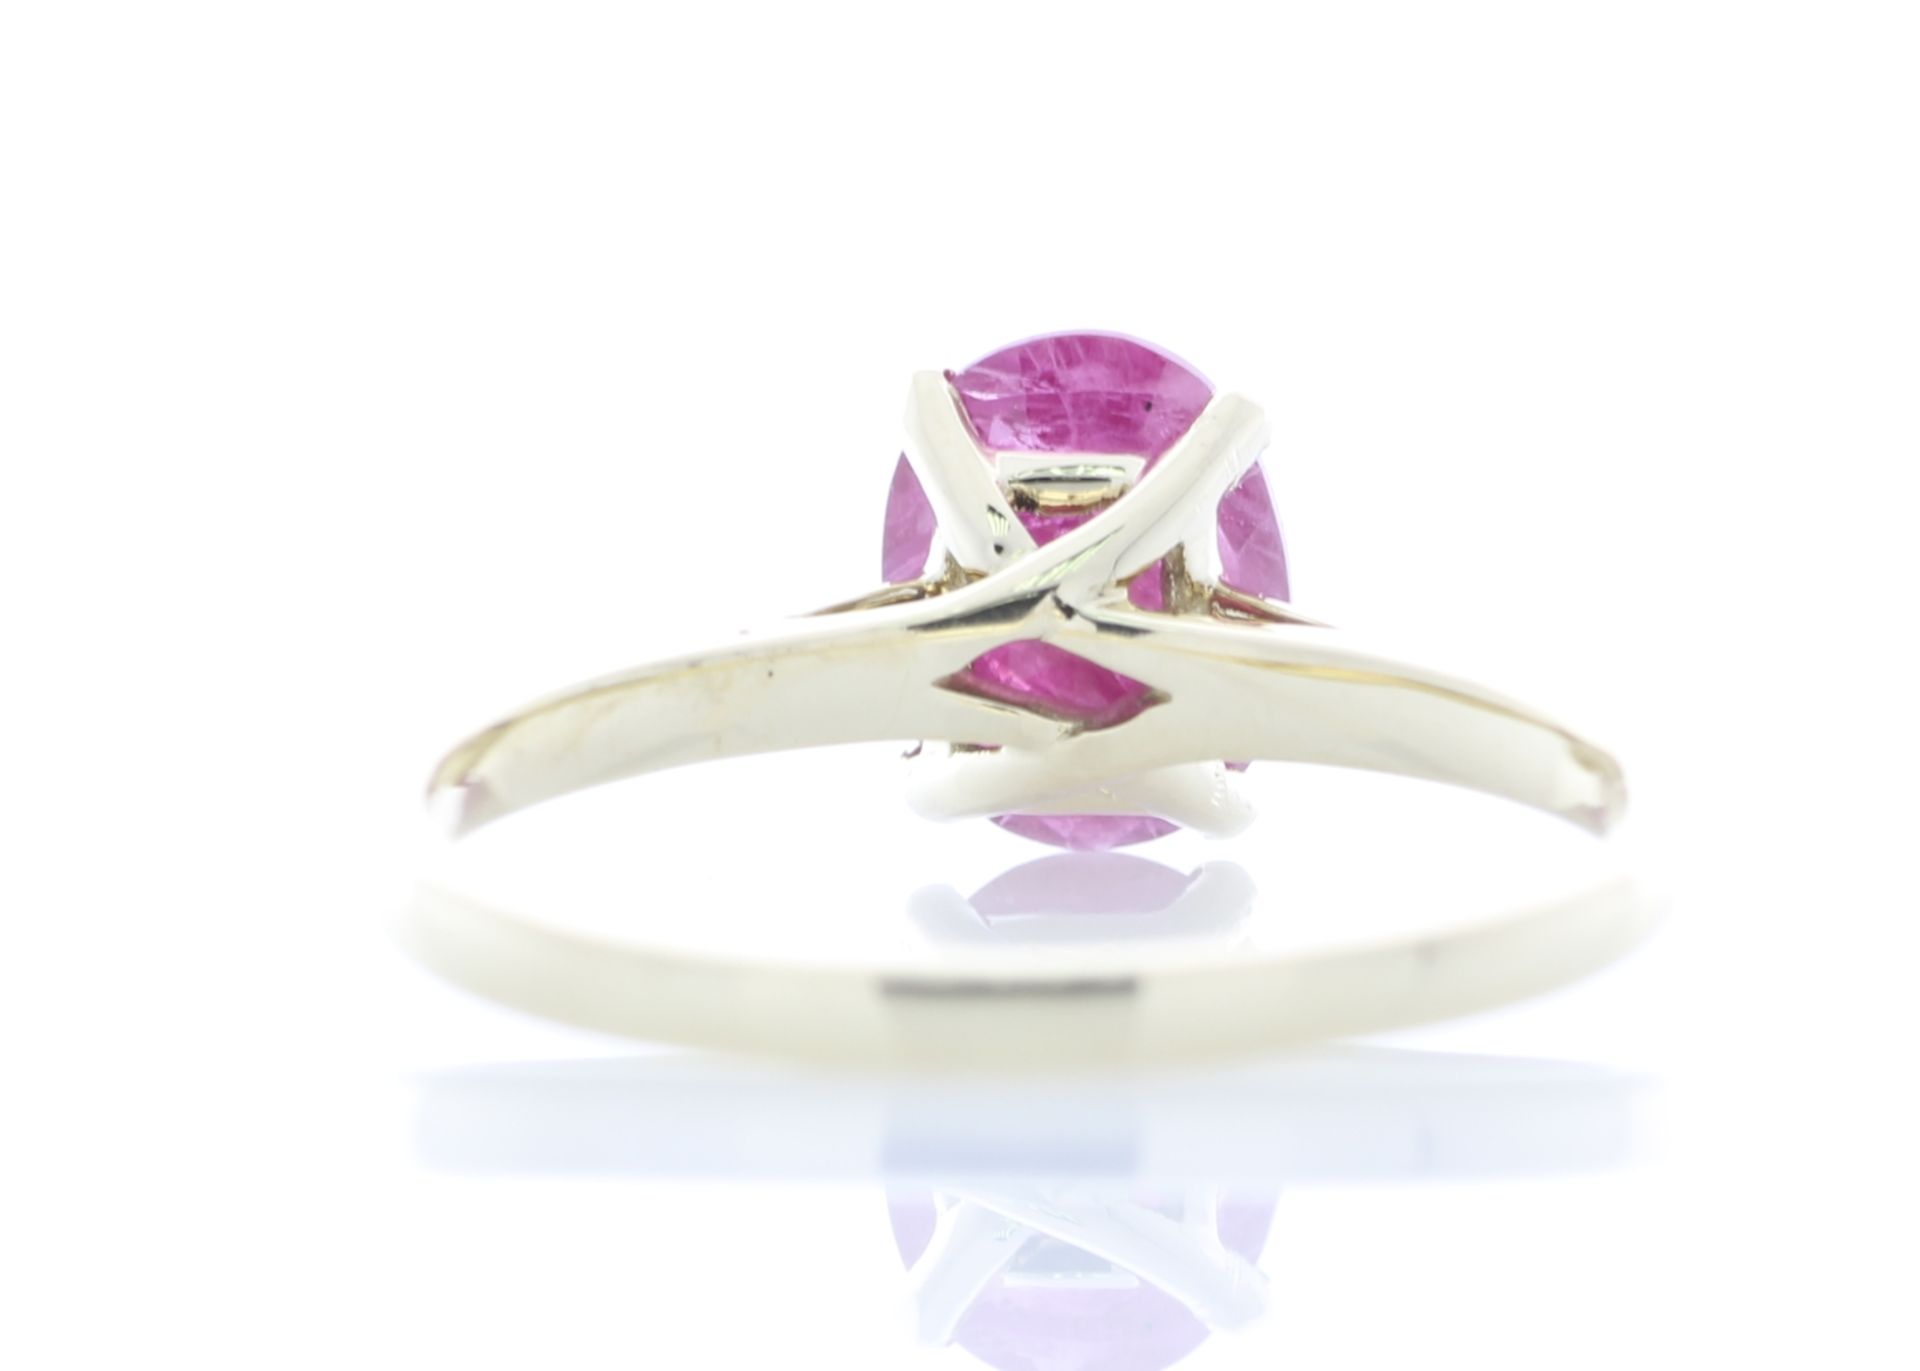 9ct Yellow Gold Single Stone Oval Cut Ruby Ring 1.24 Carats - Valued by AGI £2,350.00 - A stunning - Image 3 of 4